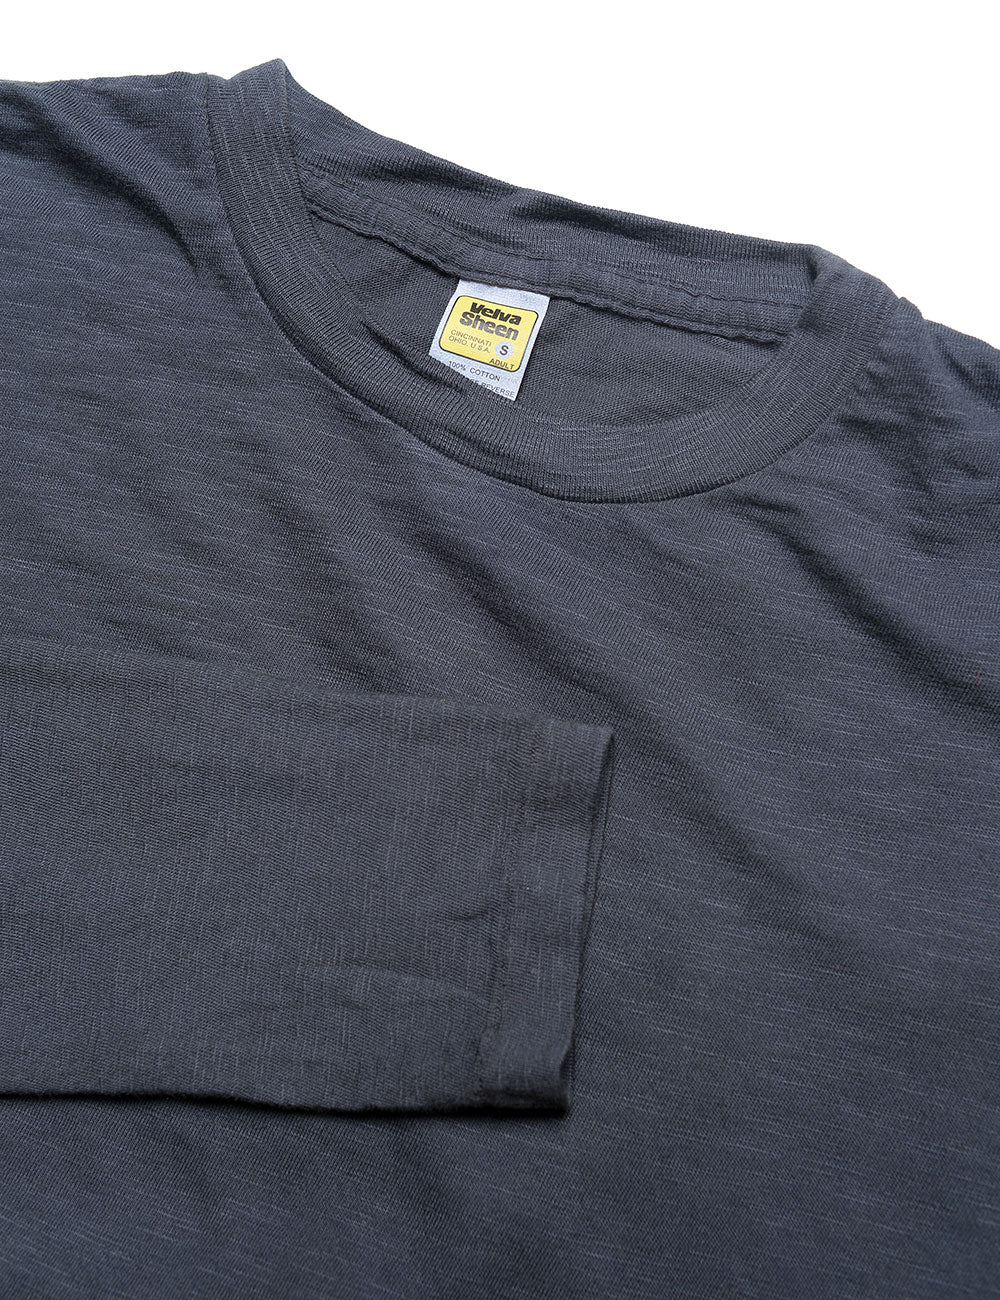 Collar and sleeve detail of Velva Sheen Long Sleeve Crewneck T-Shirt in Washed Black